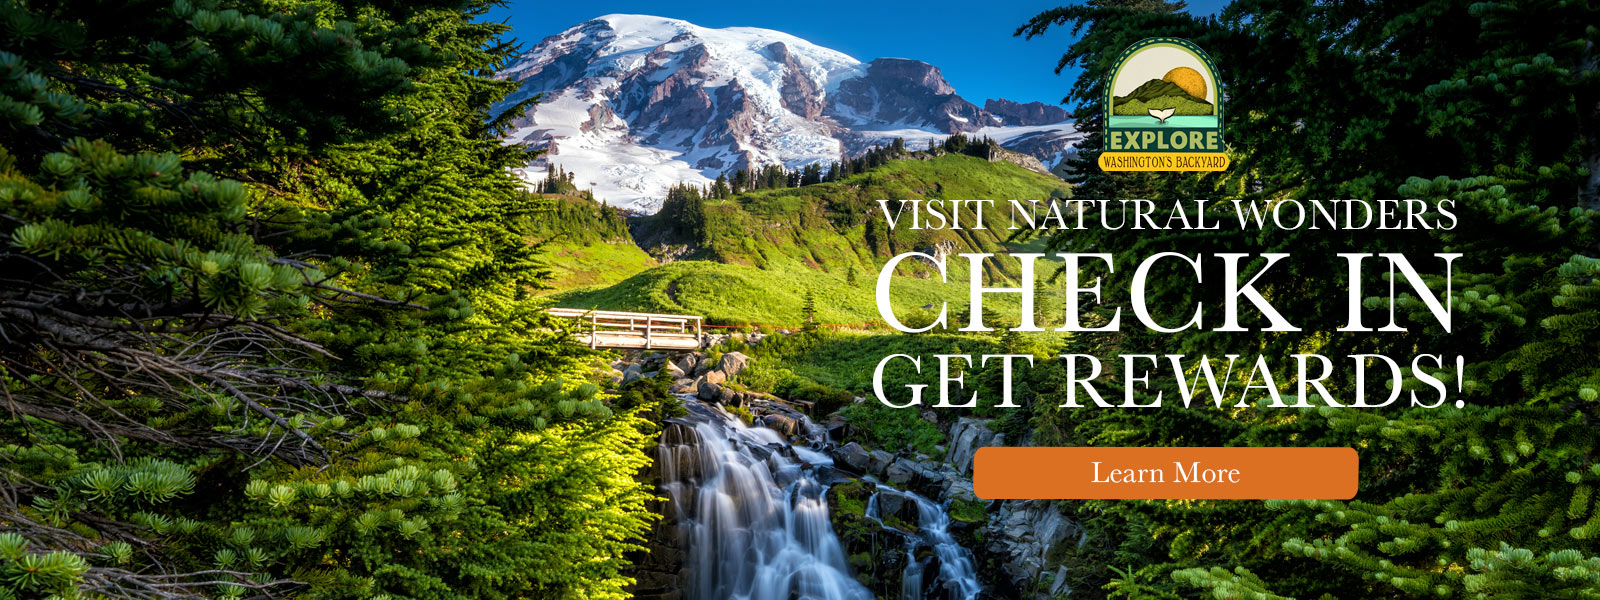 Looking for Washington's Top Attractions, From Seashore to Soaring Mountain Summits? Discover trip ideas and travel deals in our monthly enewsletter